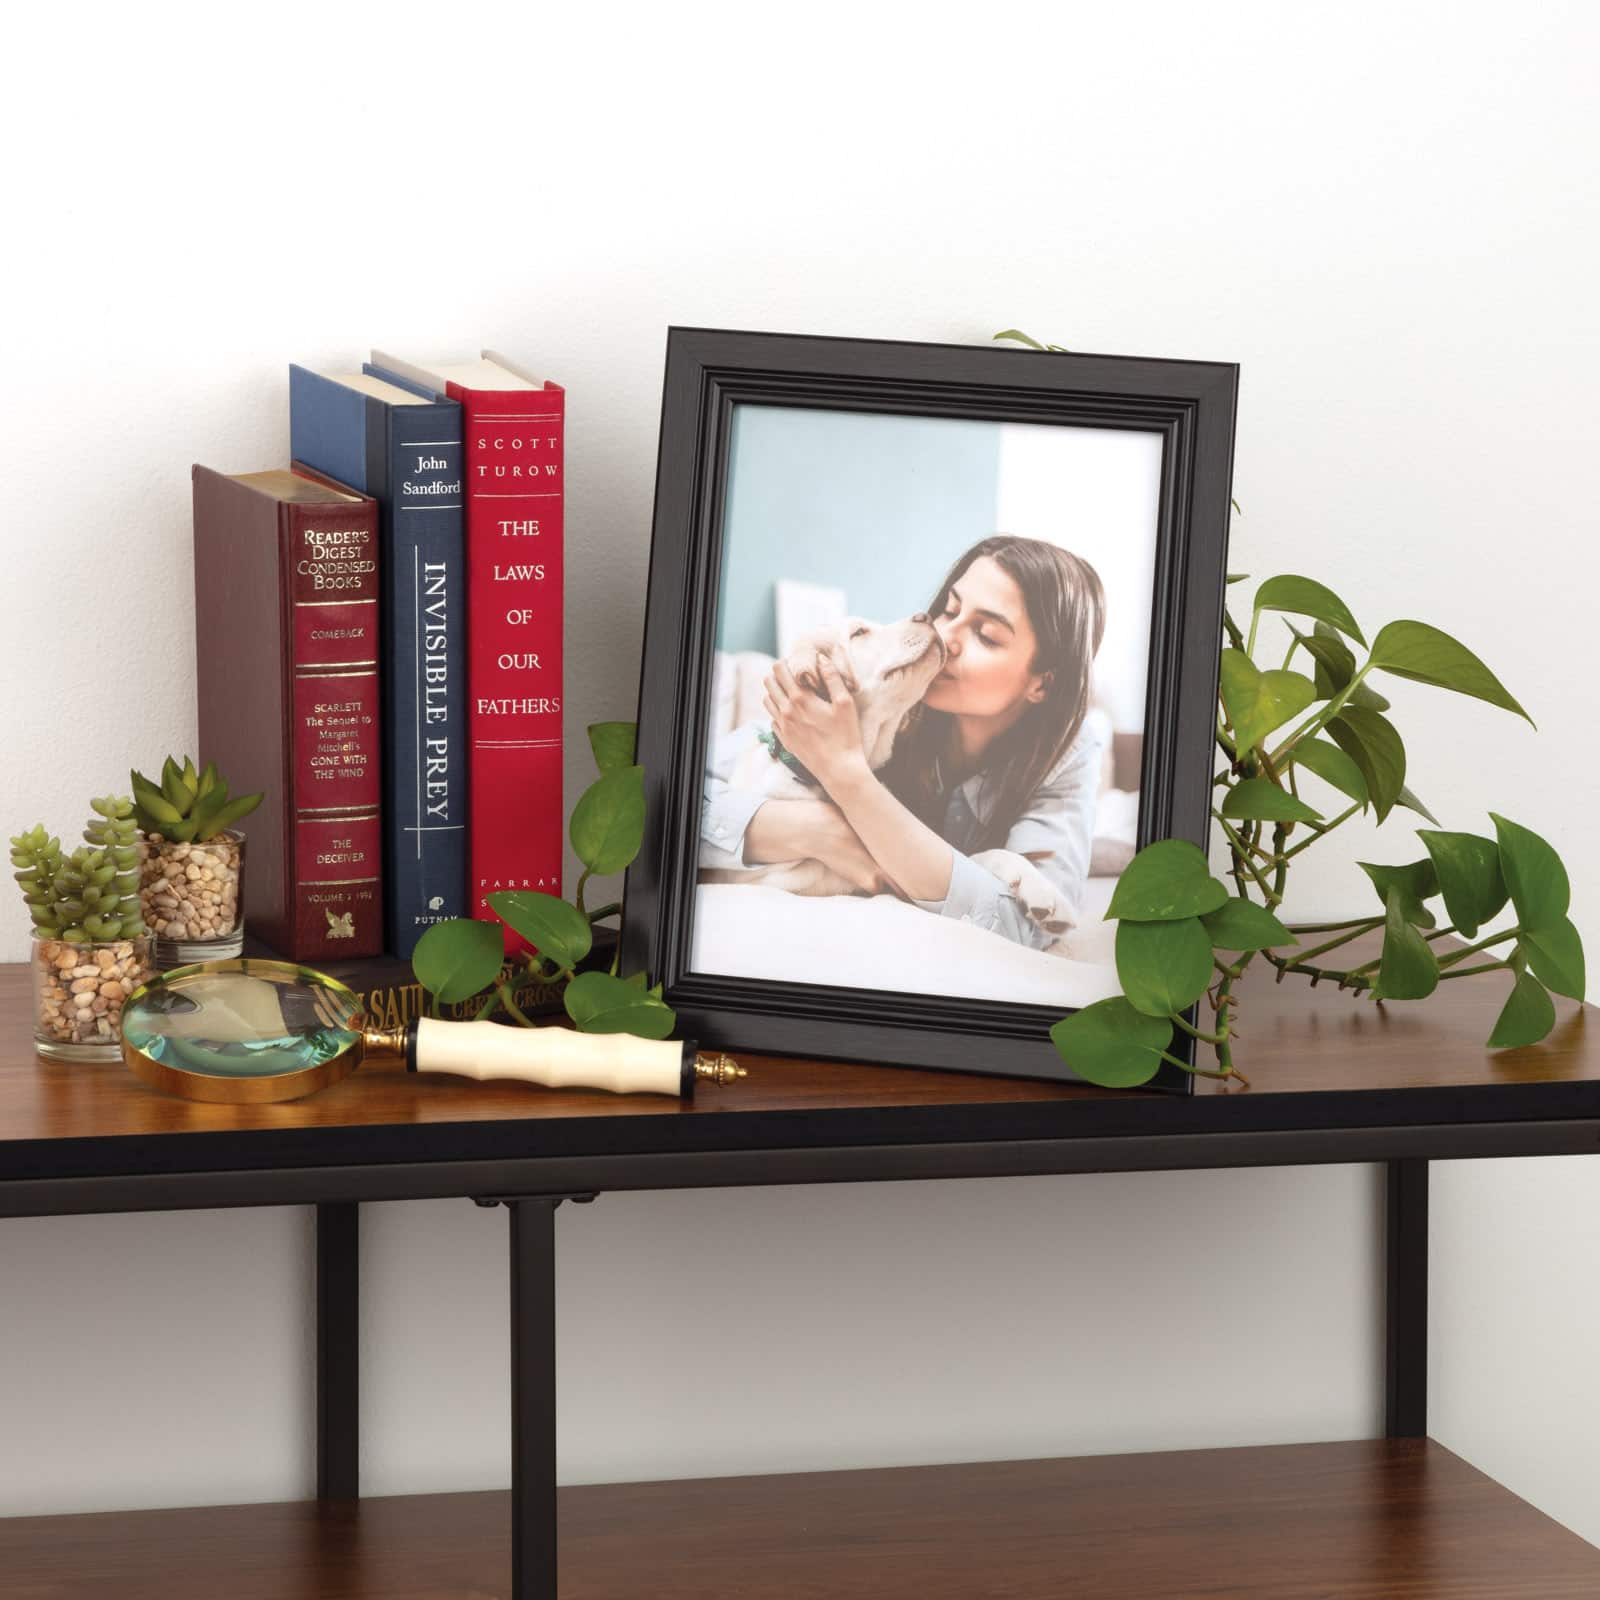 12 Pack: Black Mill Valley Frame, Simply Essentials&#x2122; by Studio D&#xE9;cor&#xAE;